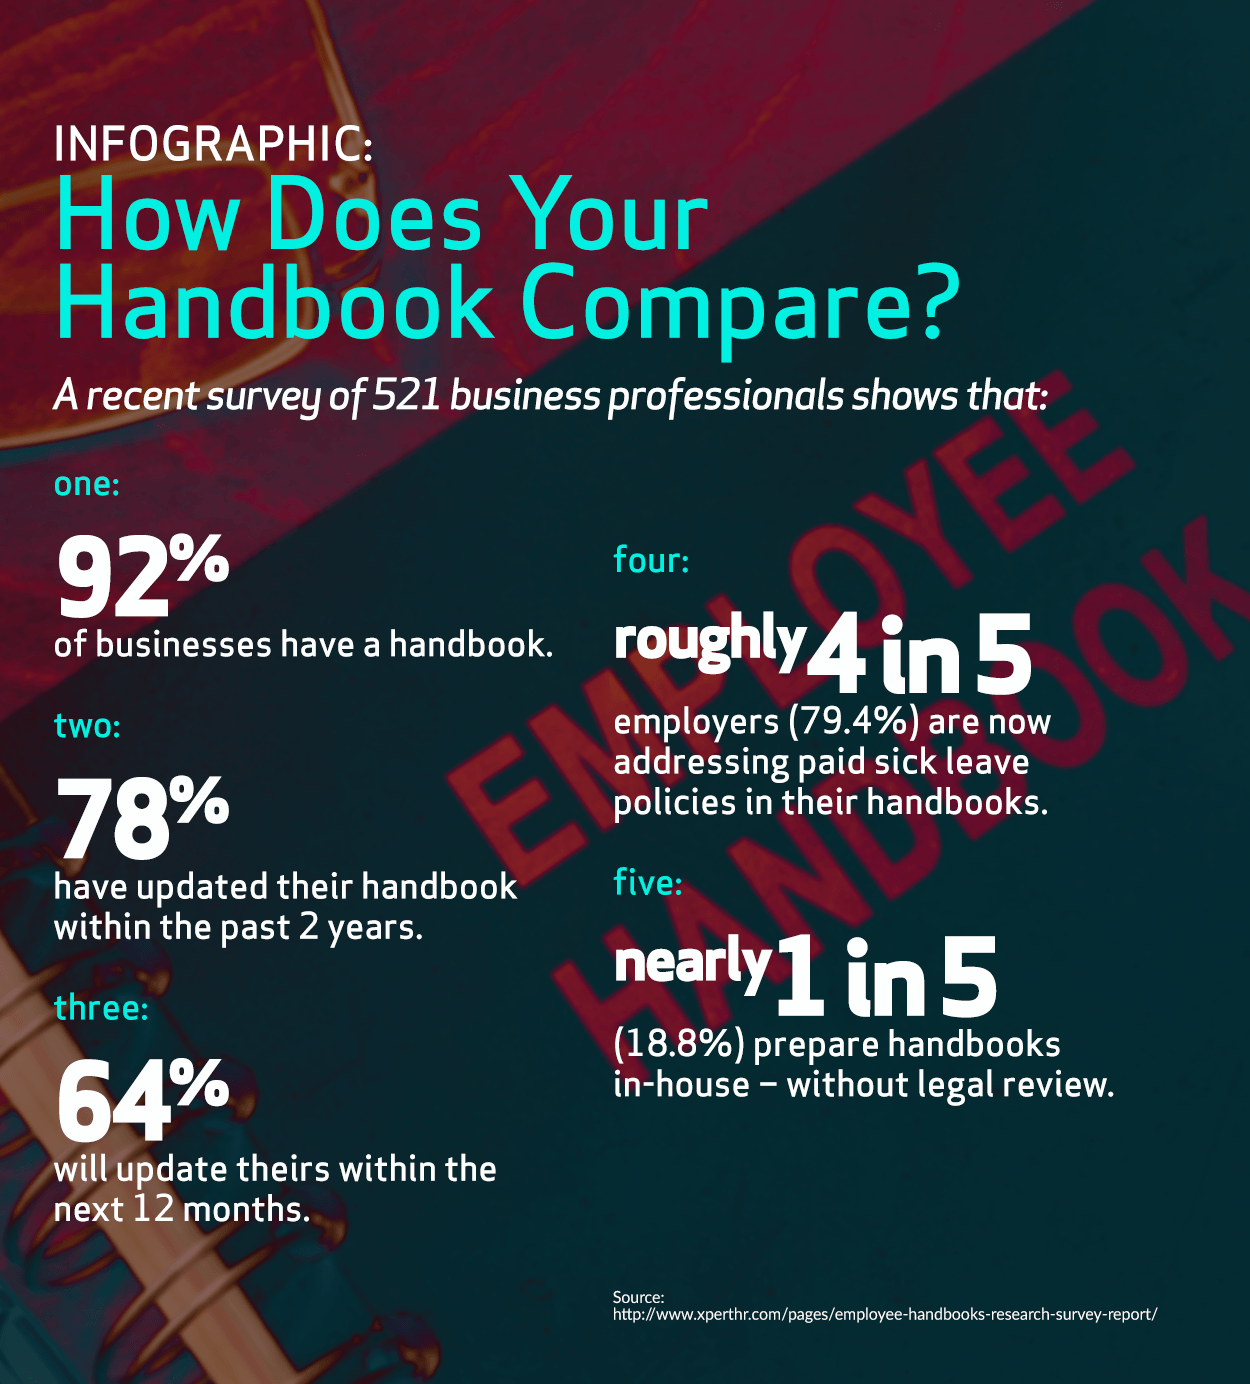 INFOGRAPHIC: How Does Your Handbook Compare?